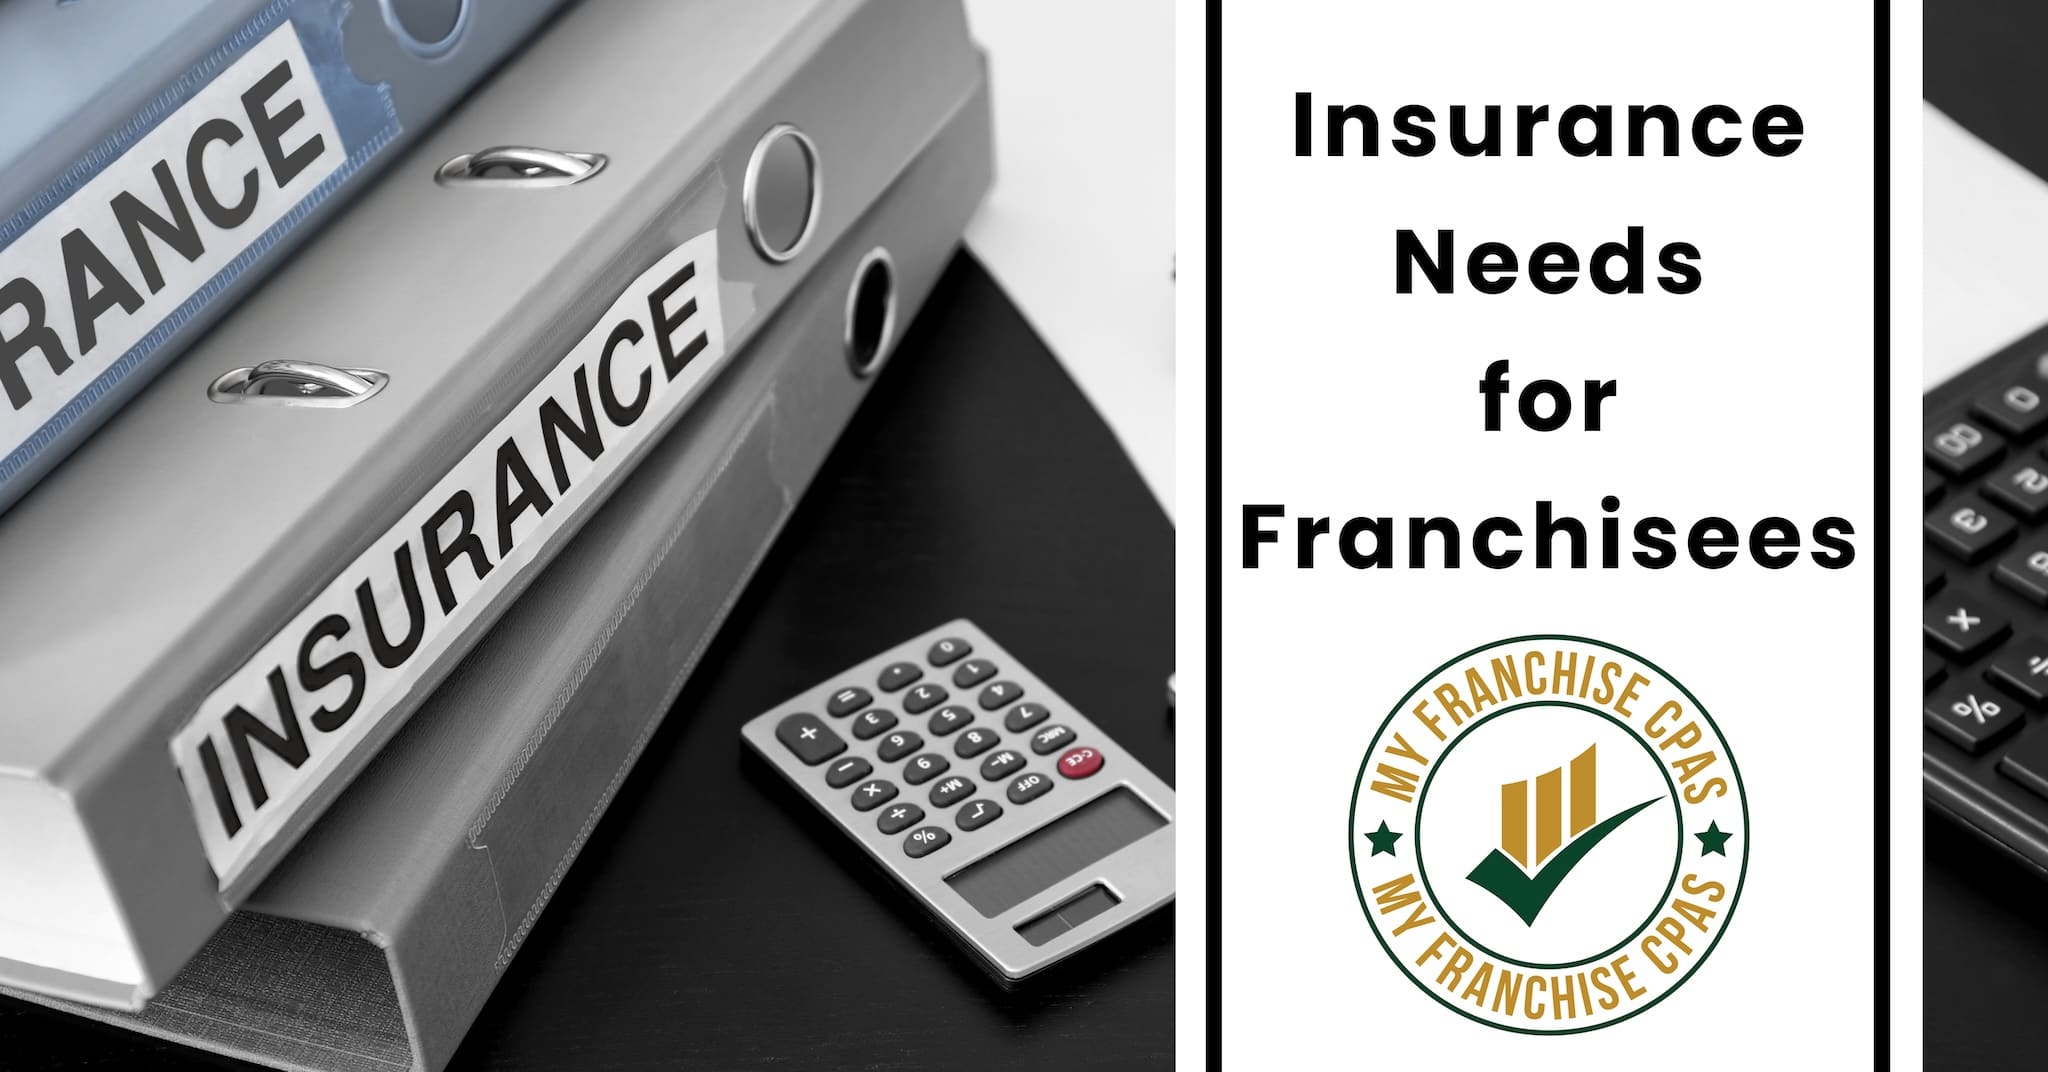 Insurance Needs for Franchisees in the USA